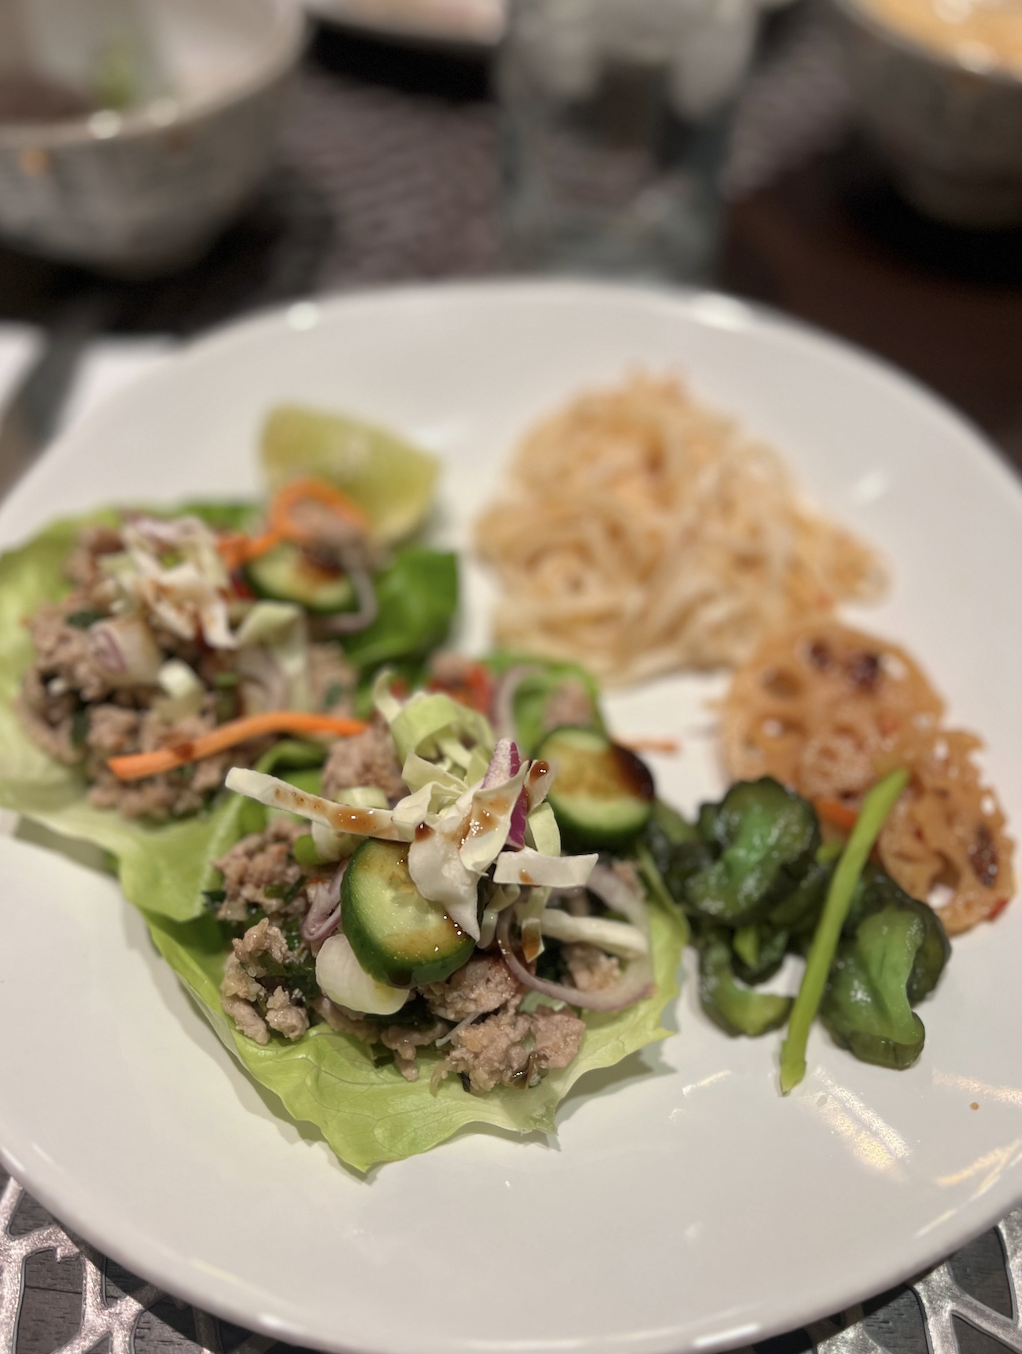 Lettuce wraps filled with meat and vegetables, side of noodles and spinach